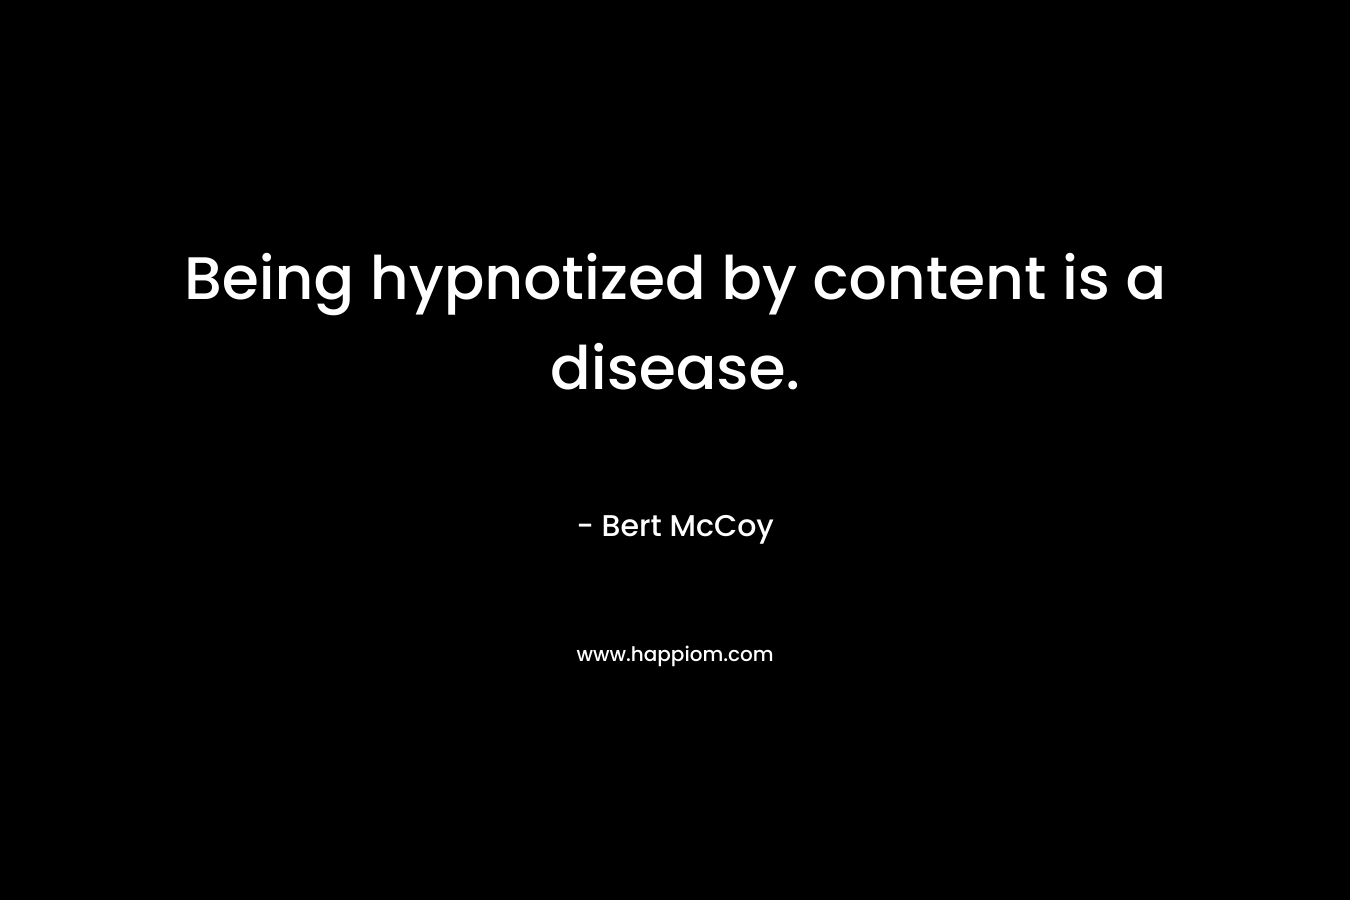 Being hypnotized by content is a disease. – Bert McCoy